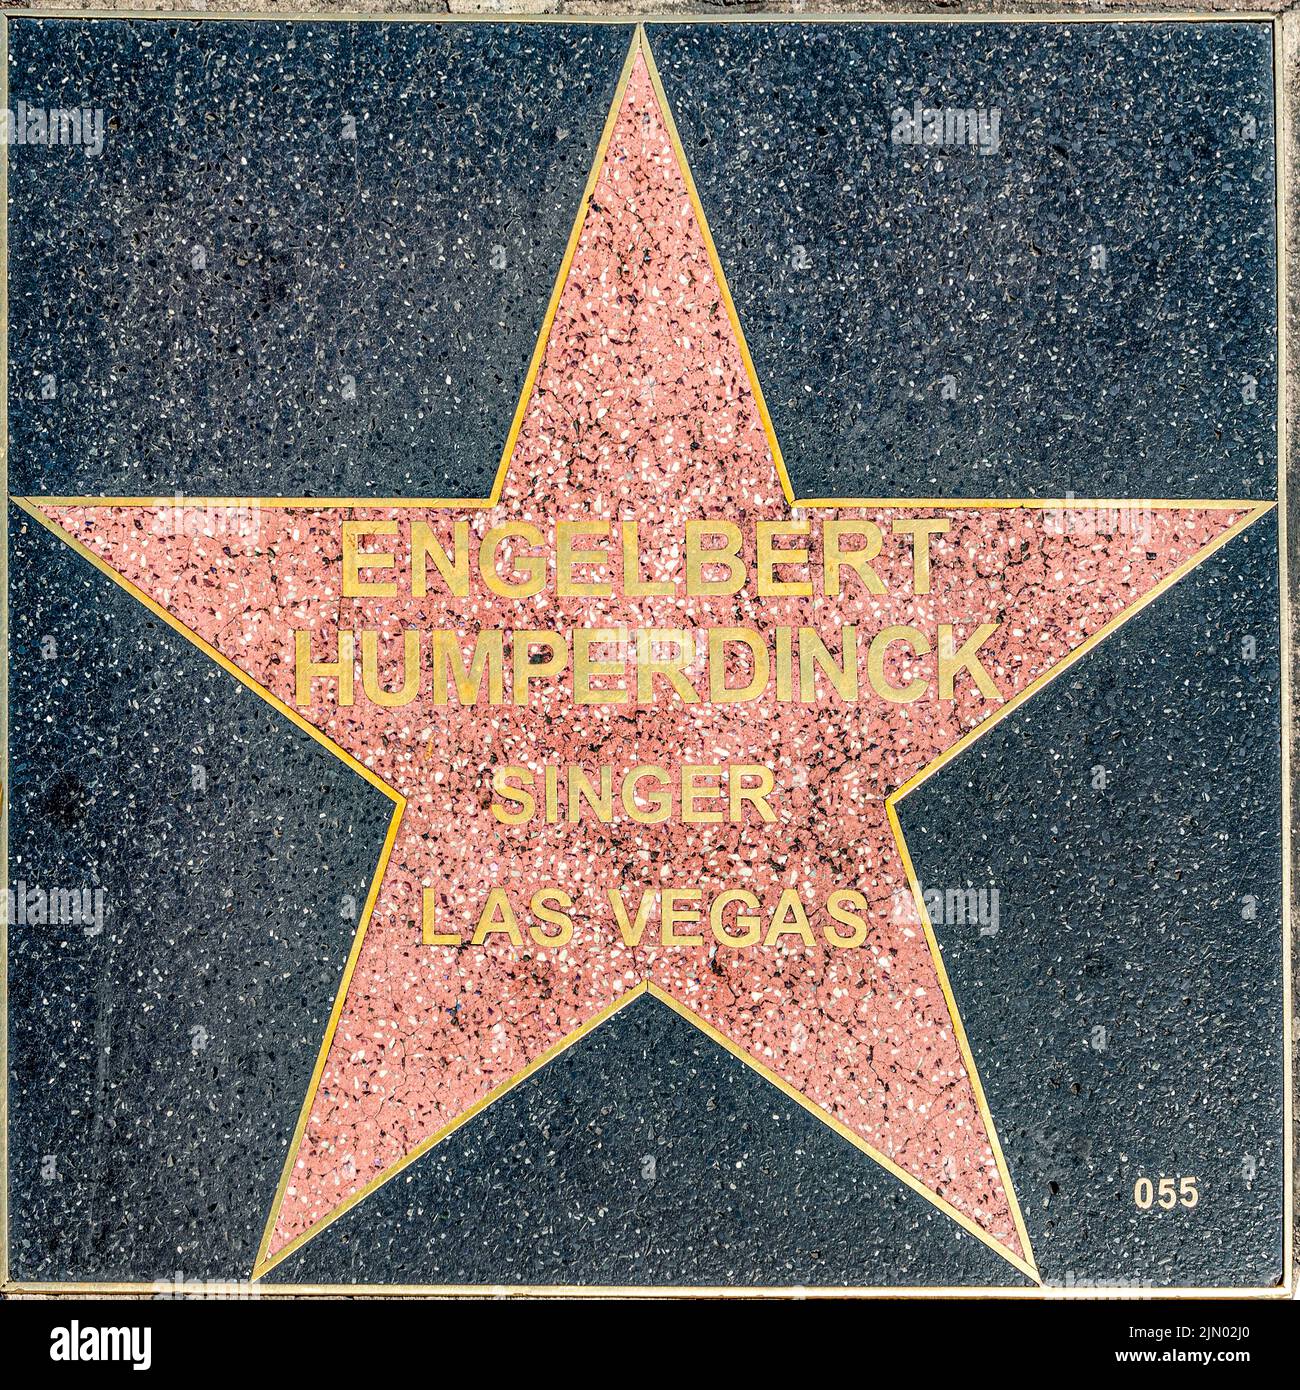 Las Vegas, USA - May 23, 2022: Engelbert Humperdinck is honored with a name tile at walk of fame in Las Vegas at the strip. Stock Photo